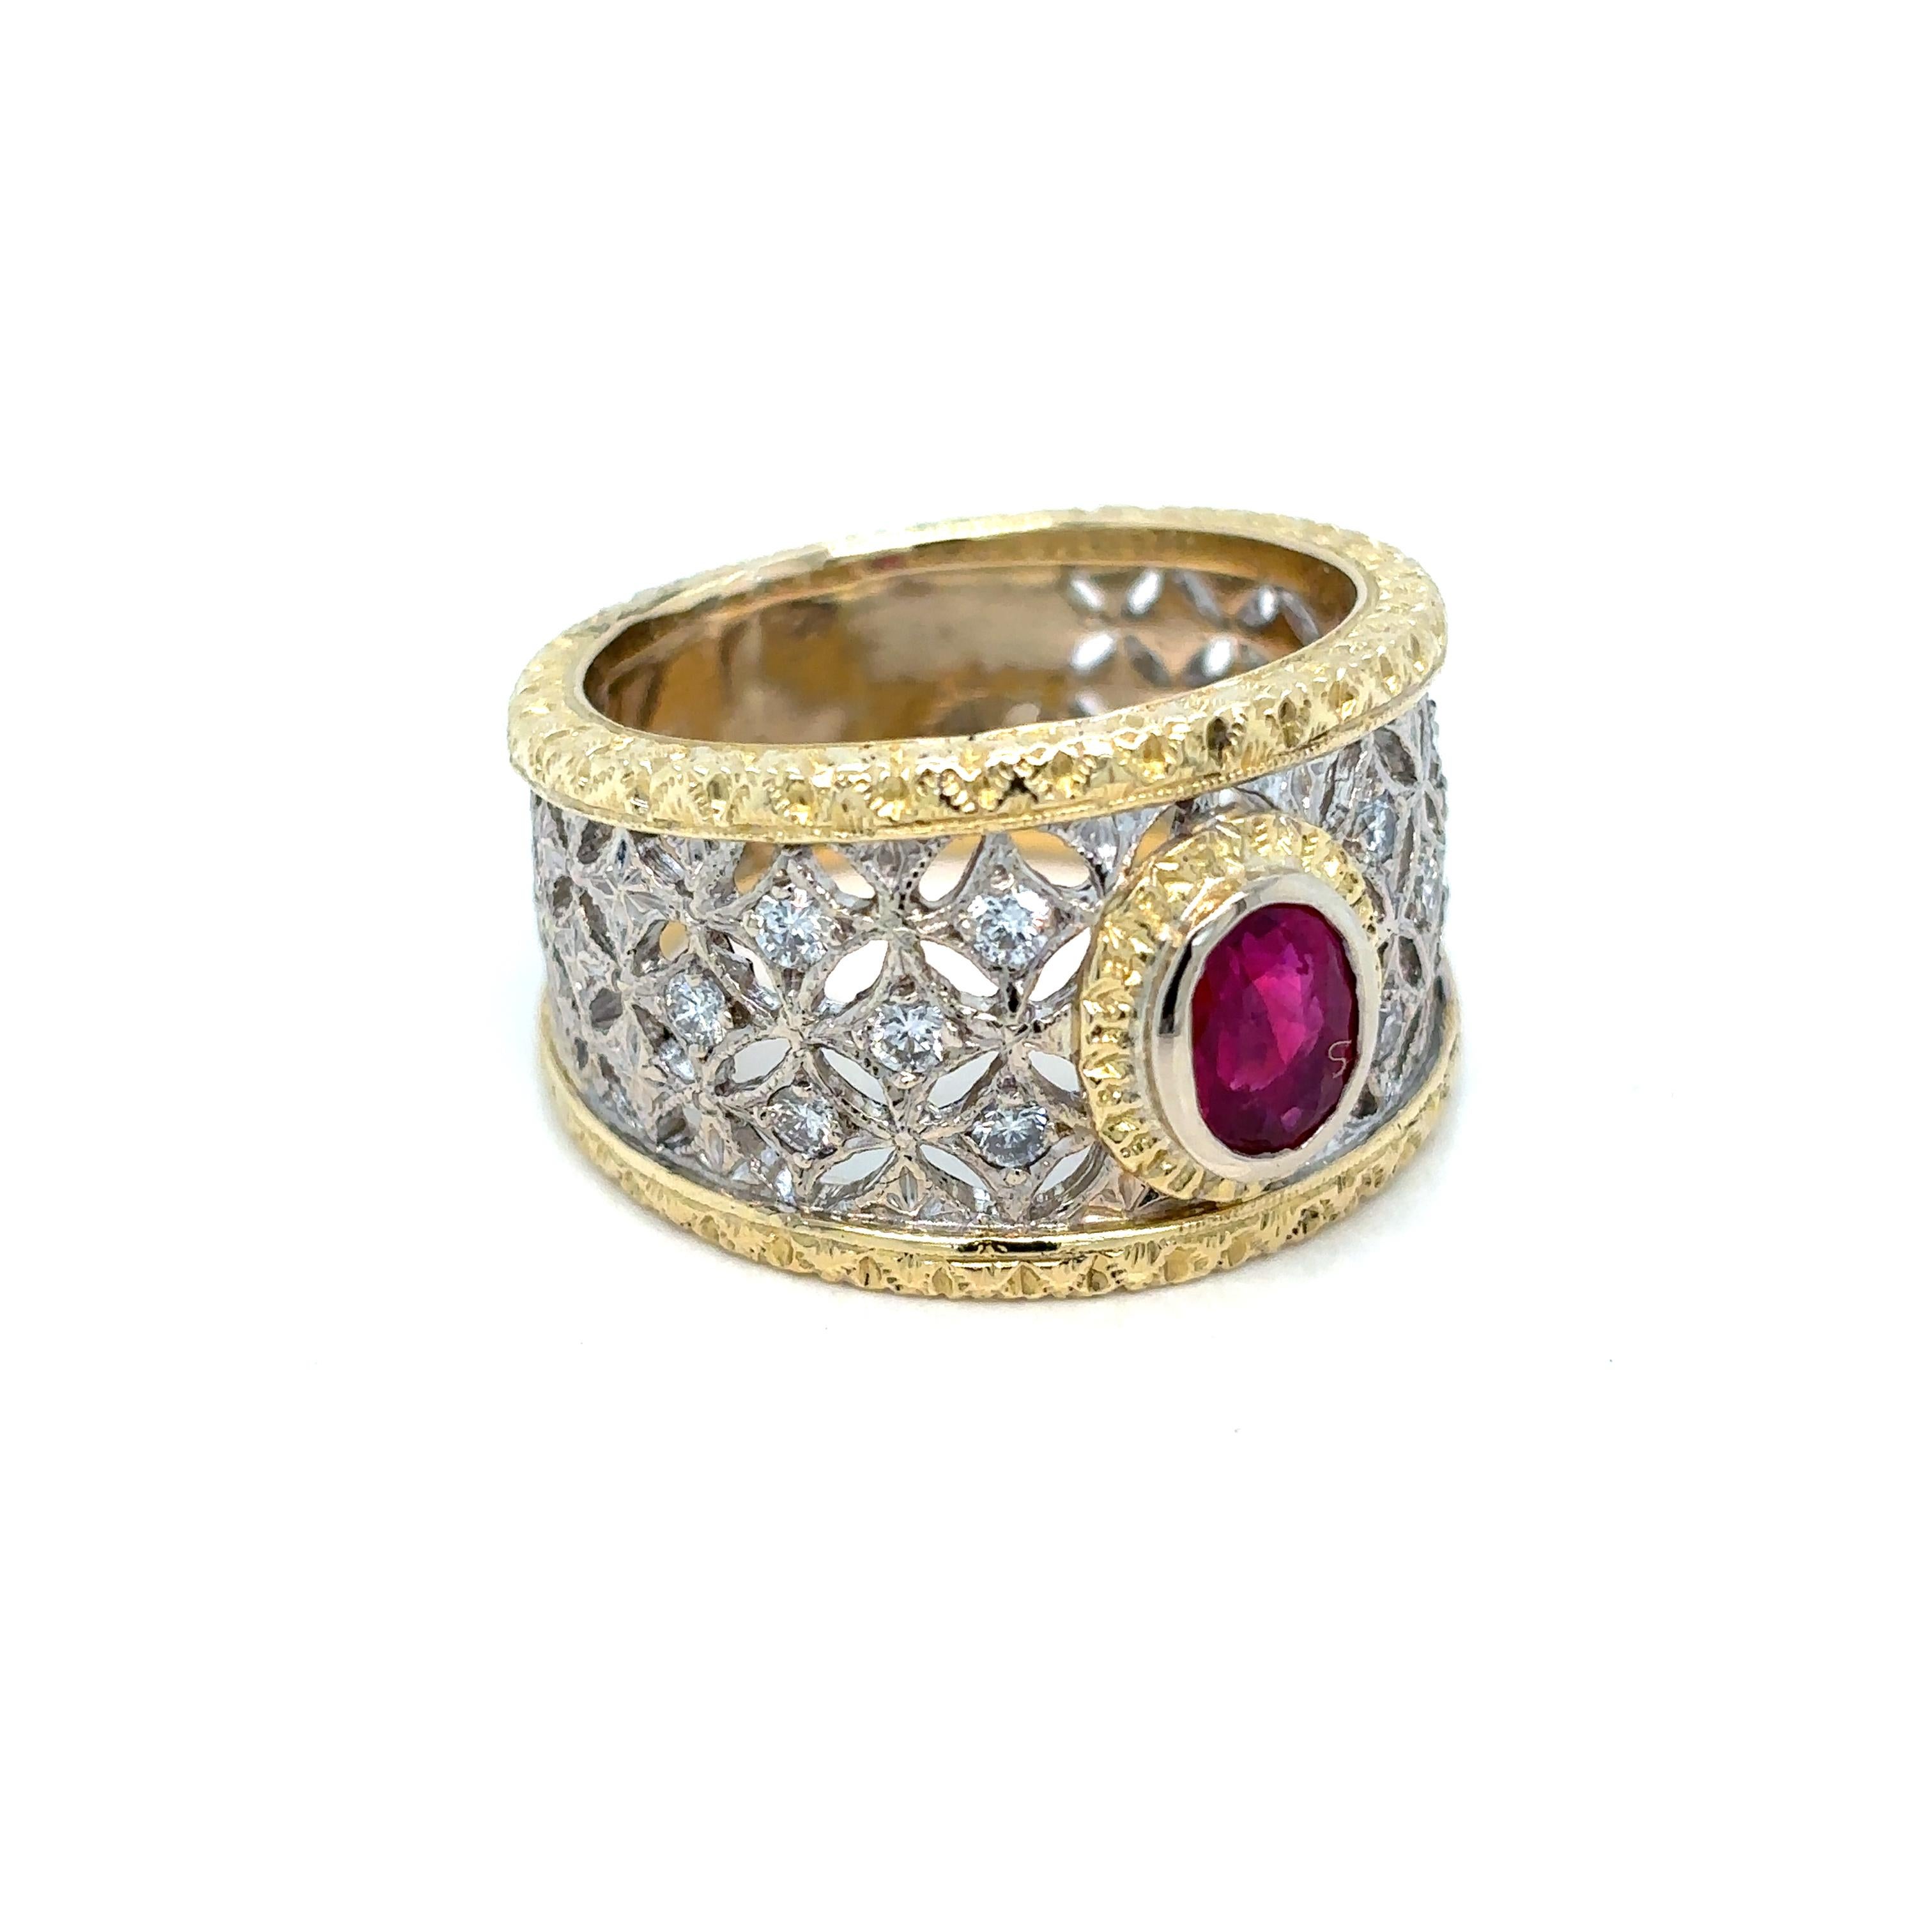 Beautiful Florentine Engraved ring, handcrafted in 18k yellow and white Gold, featuring in the center a natural Burma Ruby 0.80 carat, and surrounded by colorless round brilliant cut diamonds, 0,12 carats total. The engraved band make this ring